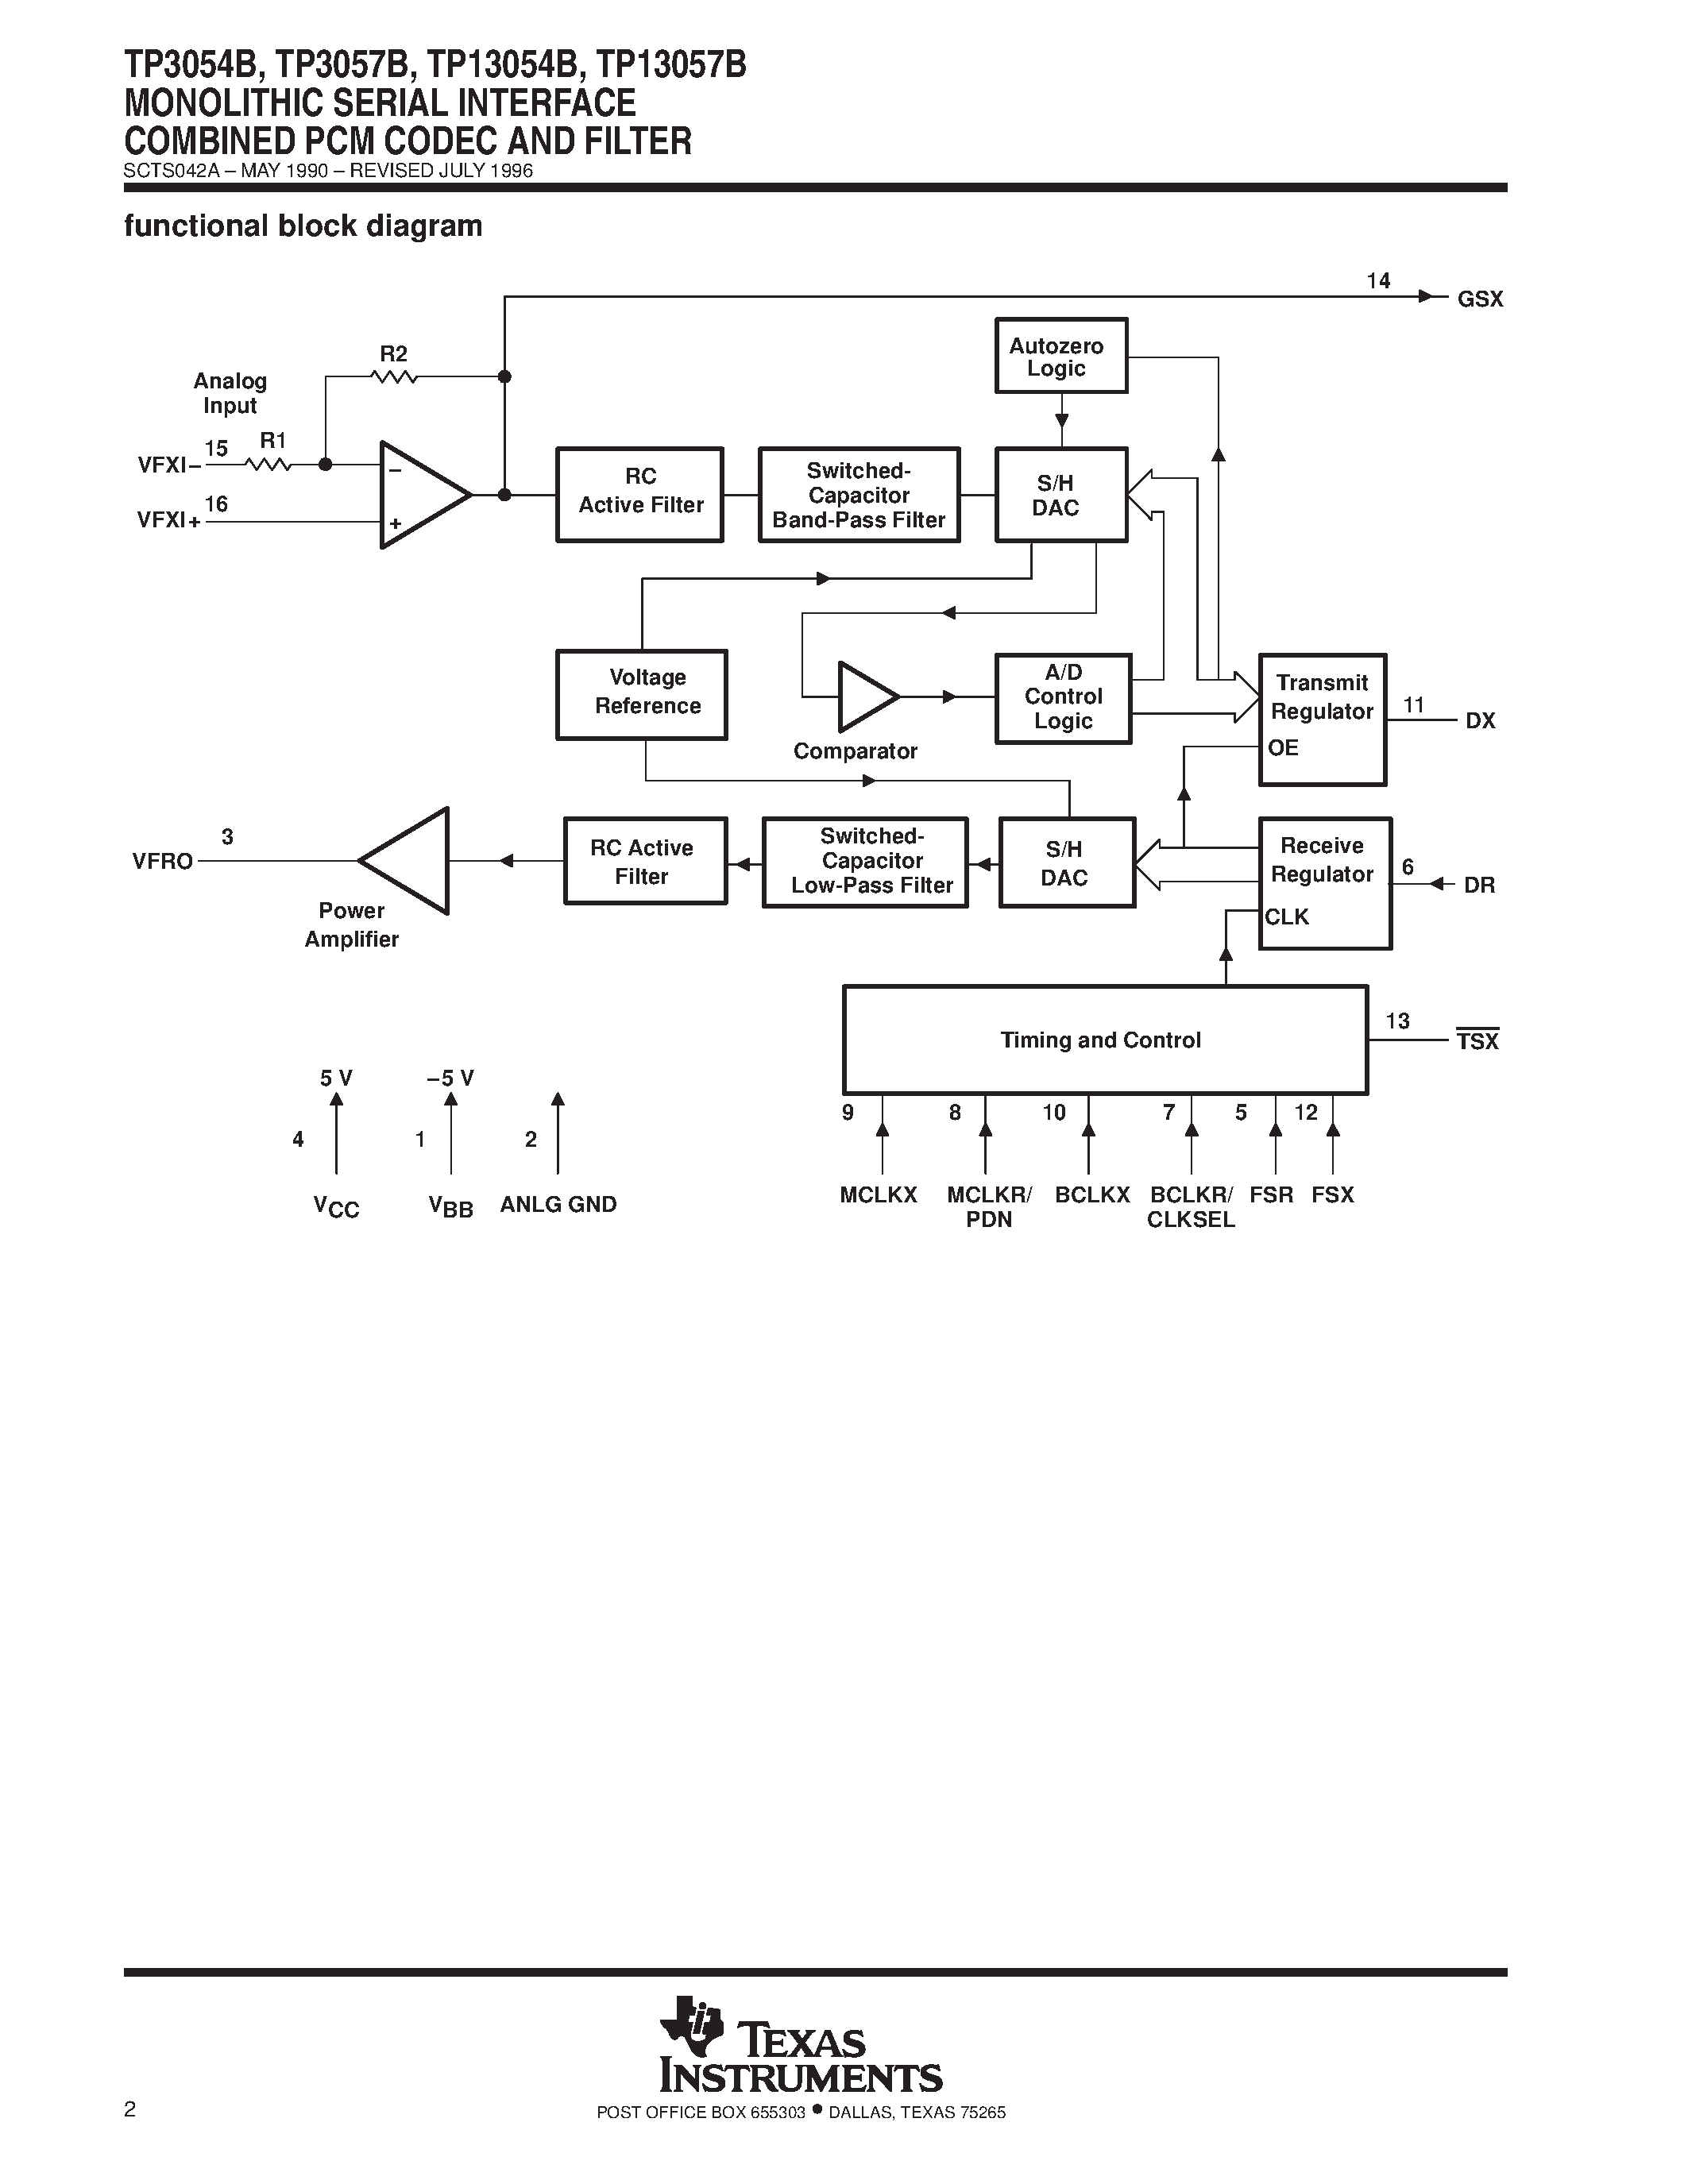 Datasheet TP13054BN - MONOLITHIC SERIAL INTERFACE COMBINED PCM CODEC AND FILTER page 2